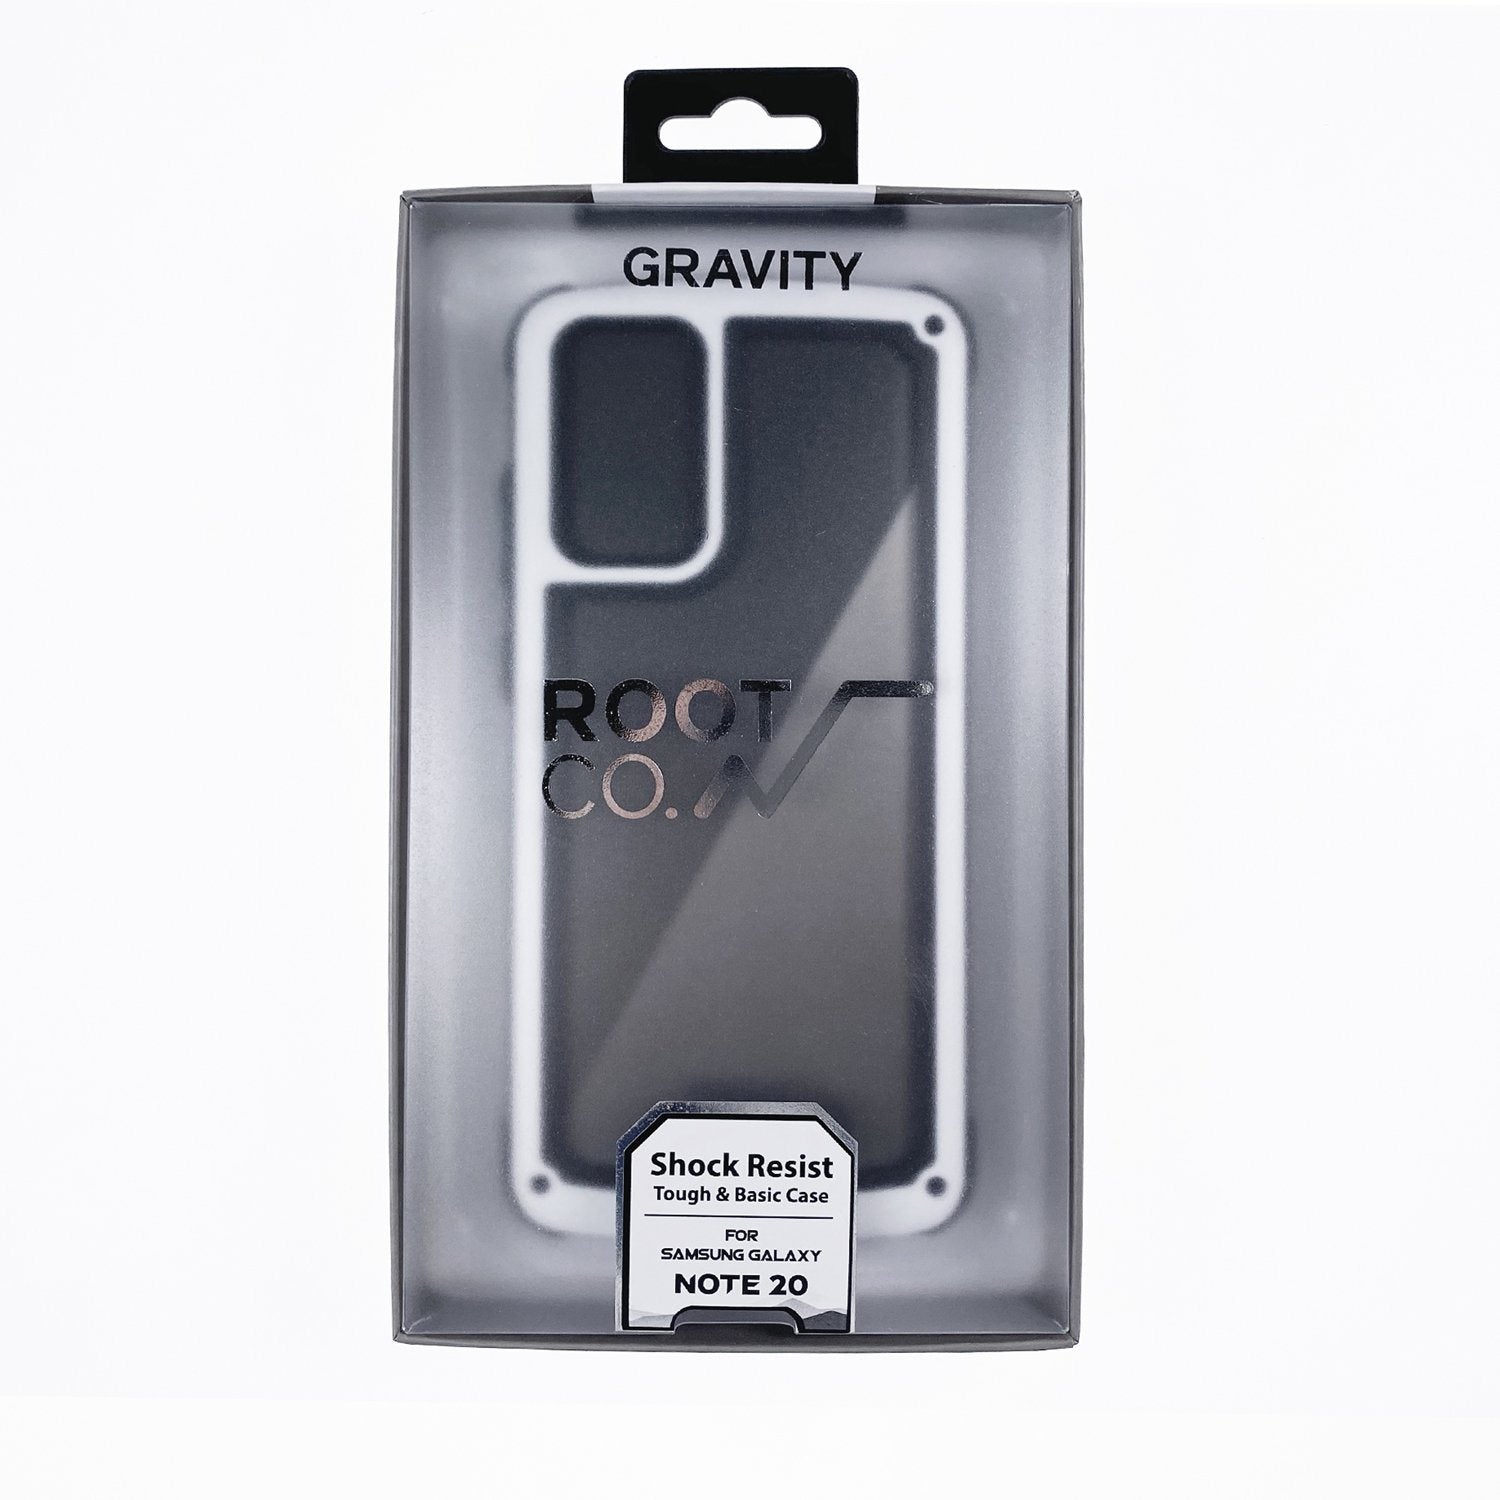 Root Co. Gravity Shock Resist Tough & Basic Case for Samsung Galaxy Note 20, White Default ROOT CO. 